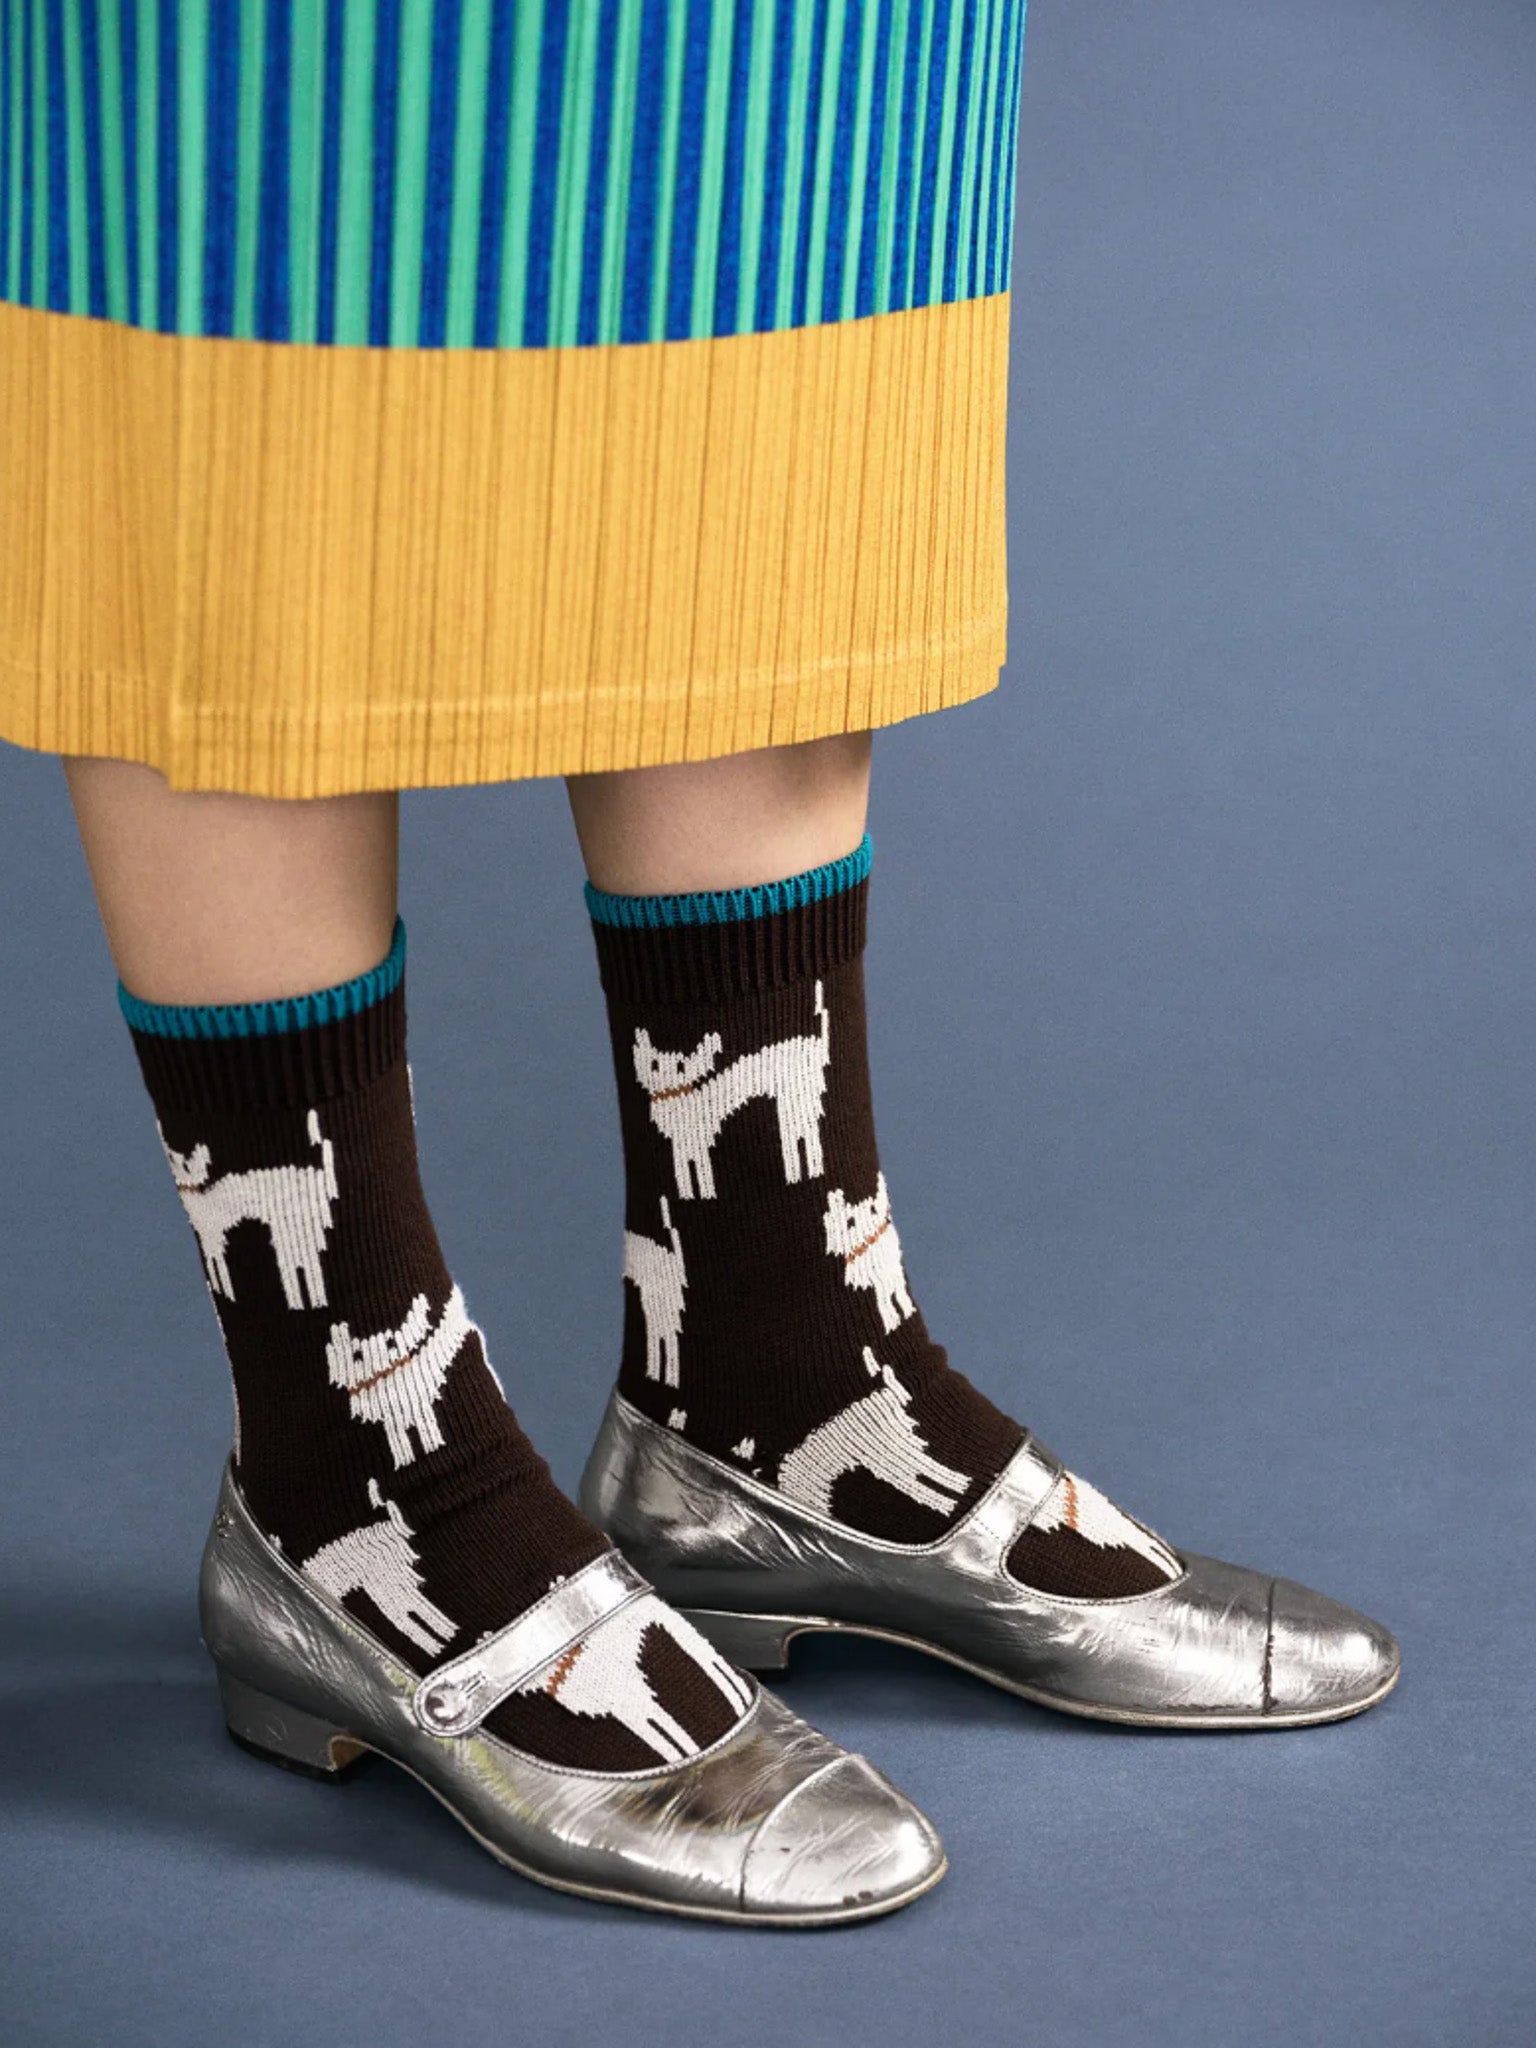 Hansel from Basel Raining Cats and Dogs Crew Socks